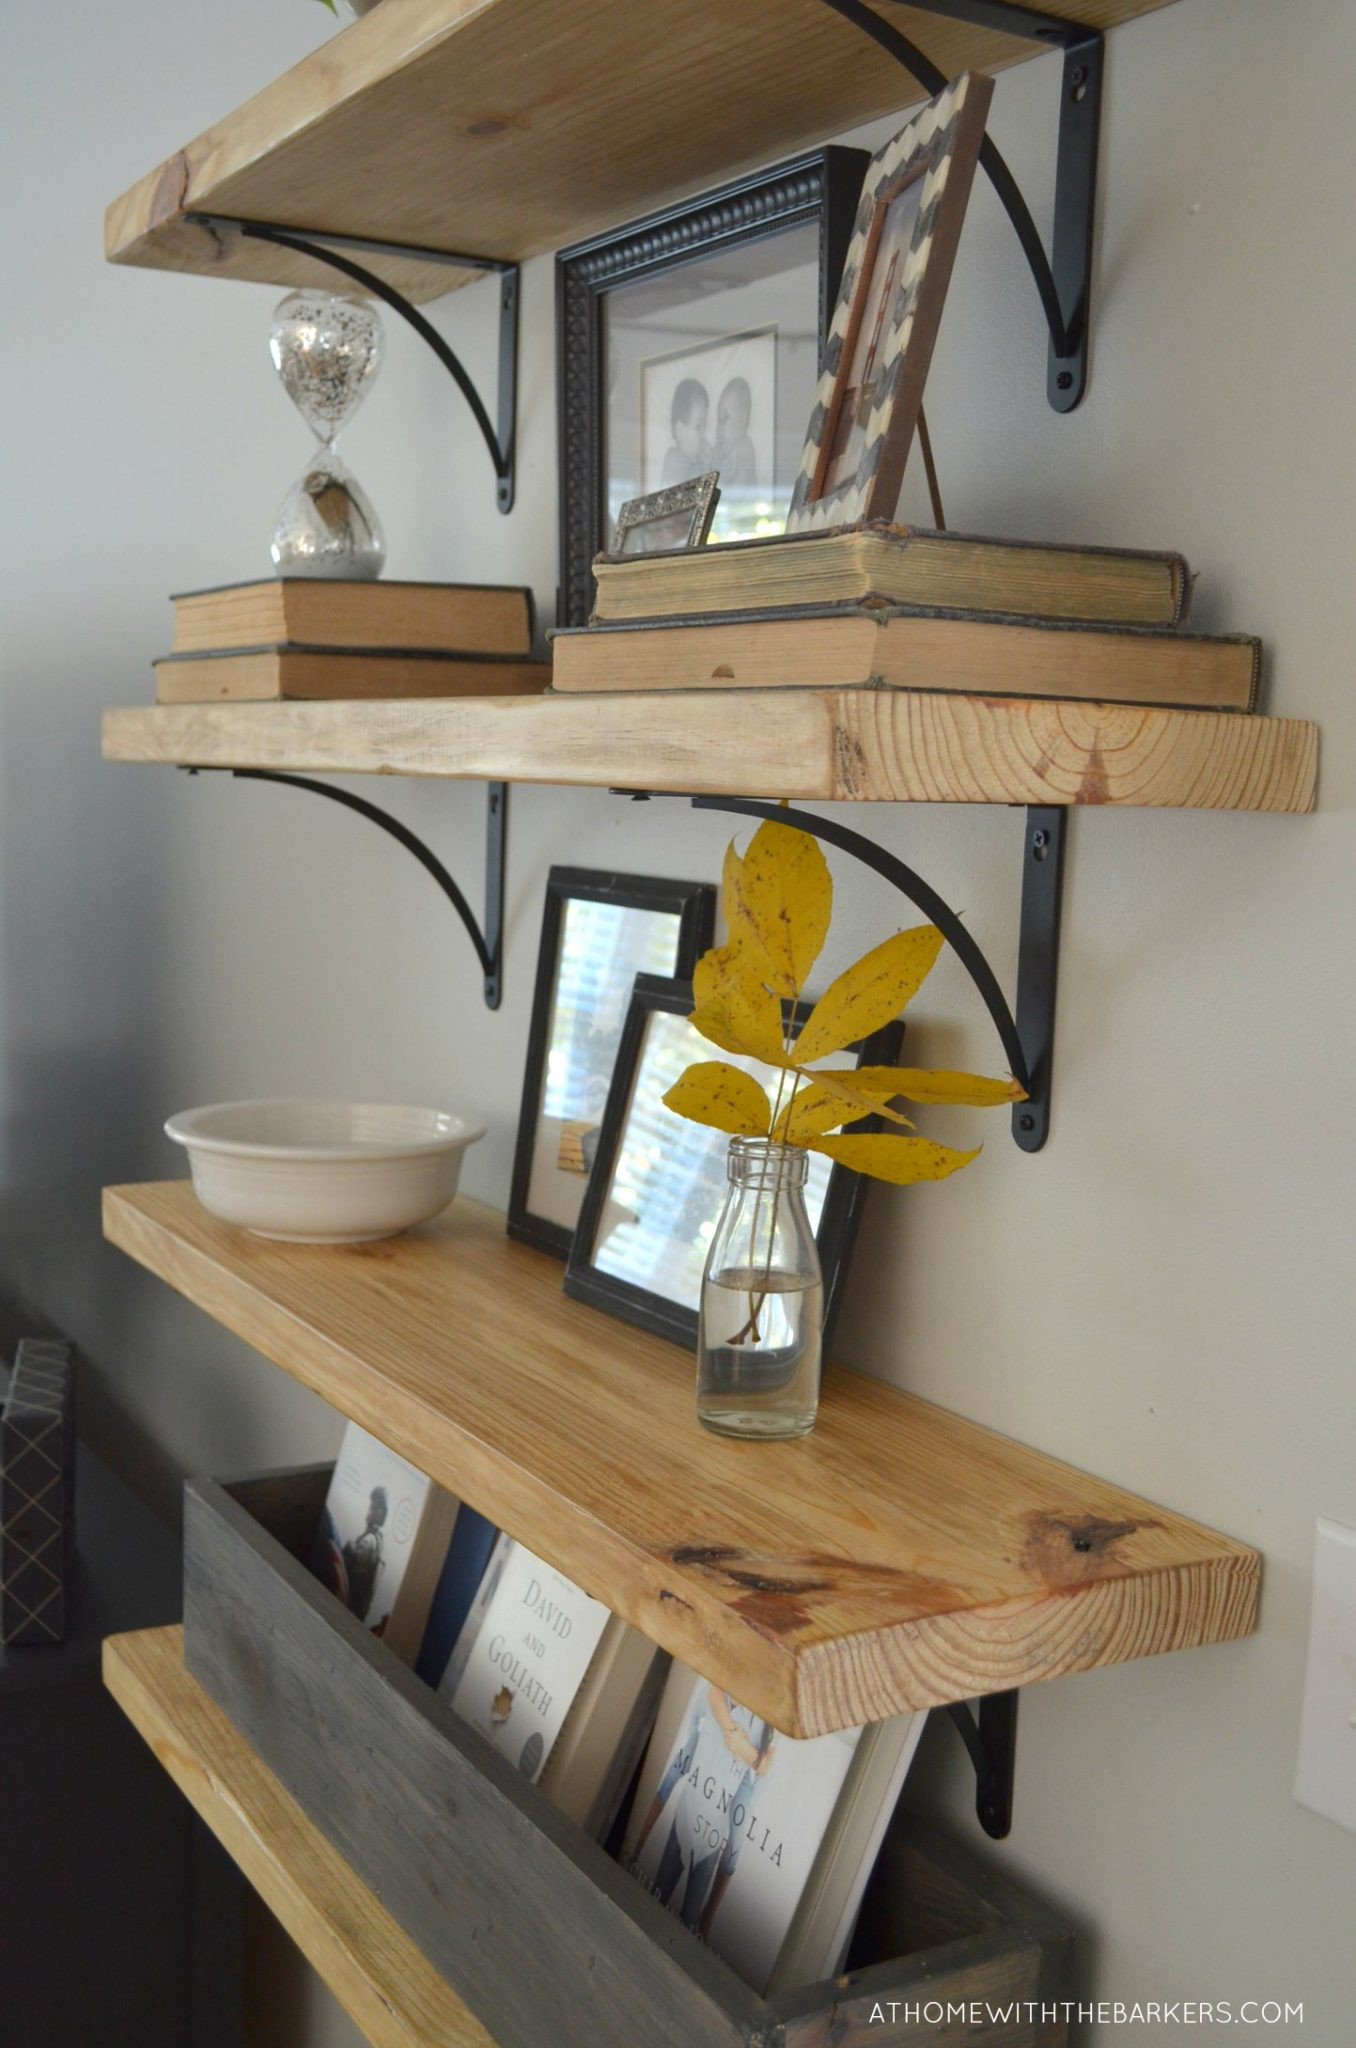 Wood Shelves DIY
 DIY Rustic Wood Shelves At Home with The Barkers